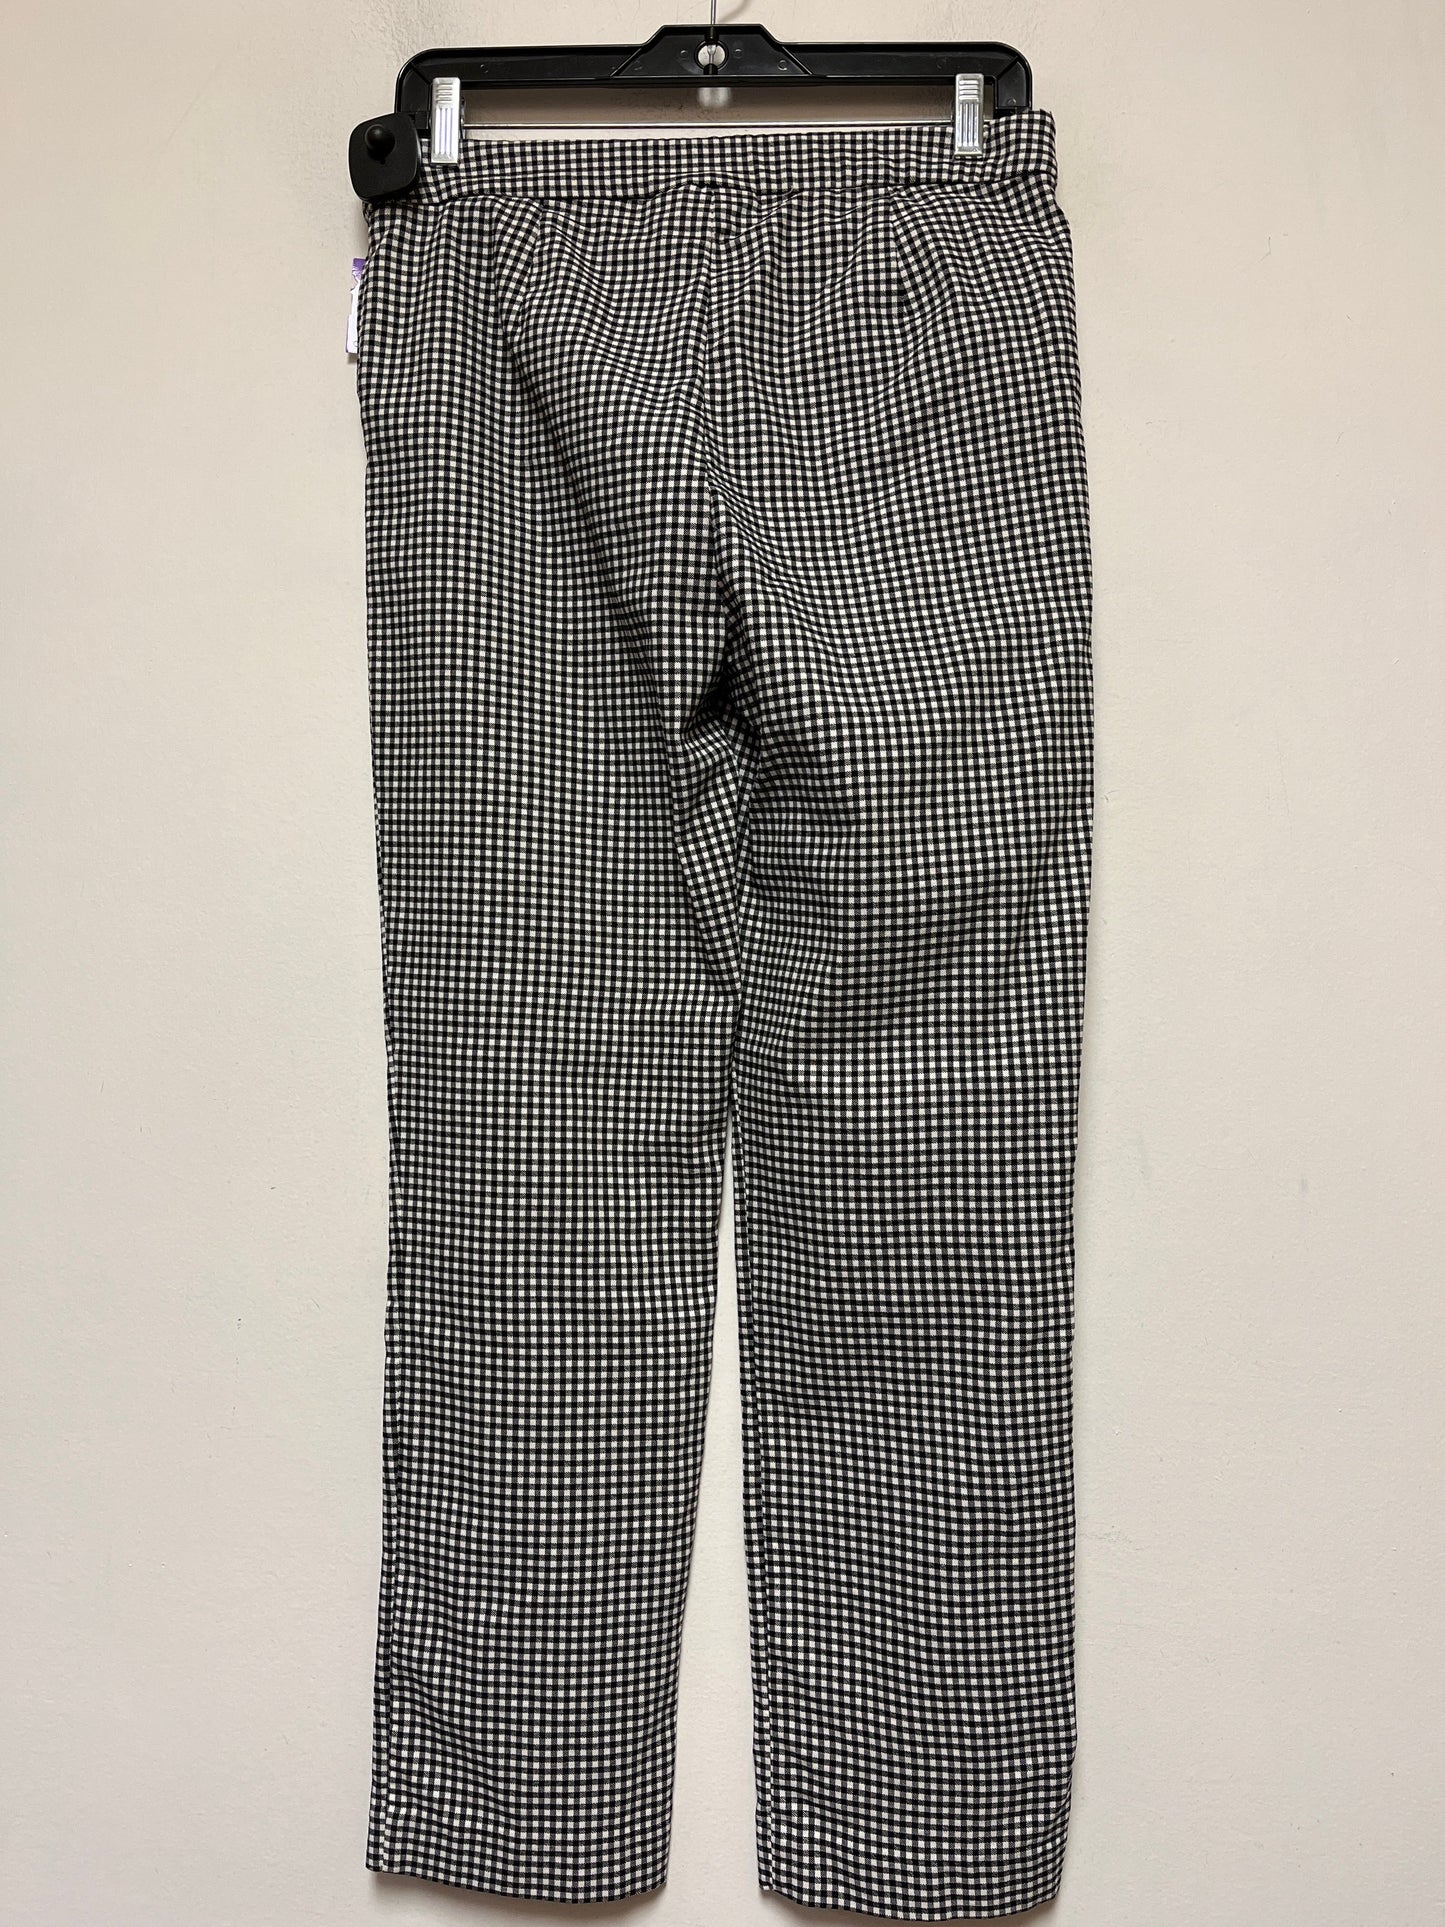 Checkered Pattern Pants Other Nicole Miller, Size 8